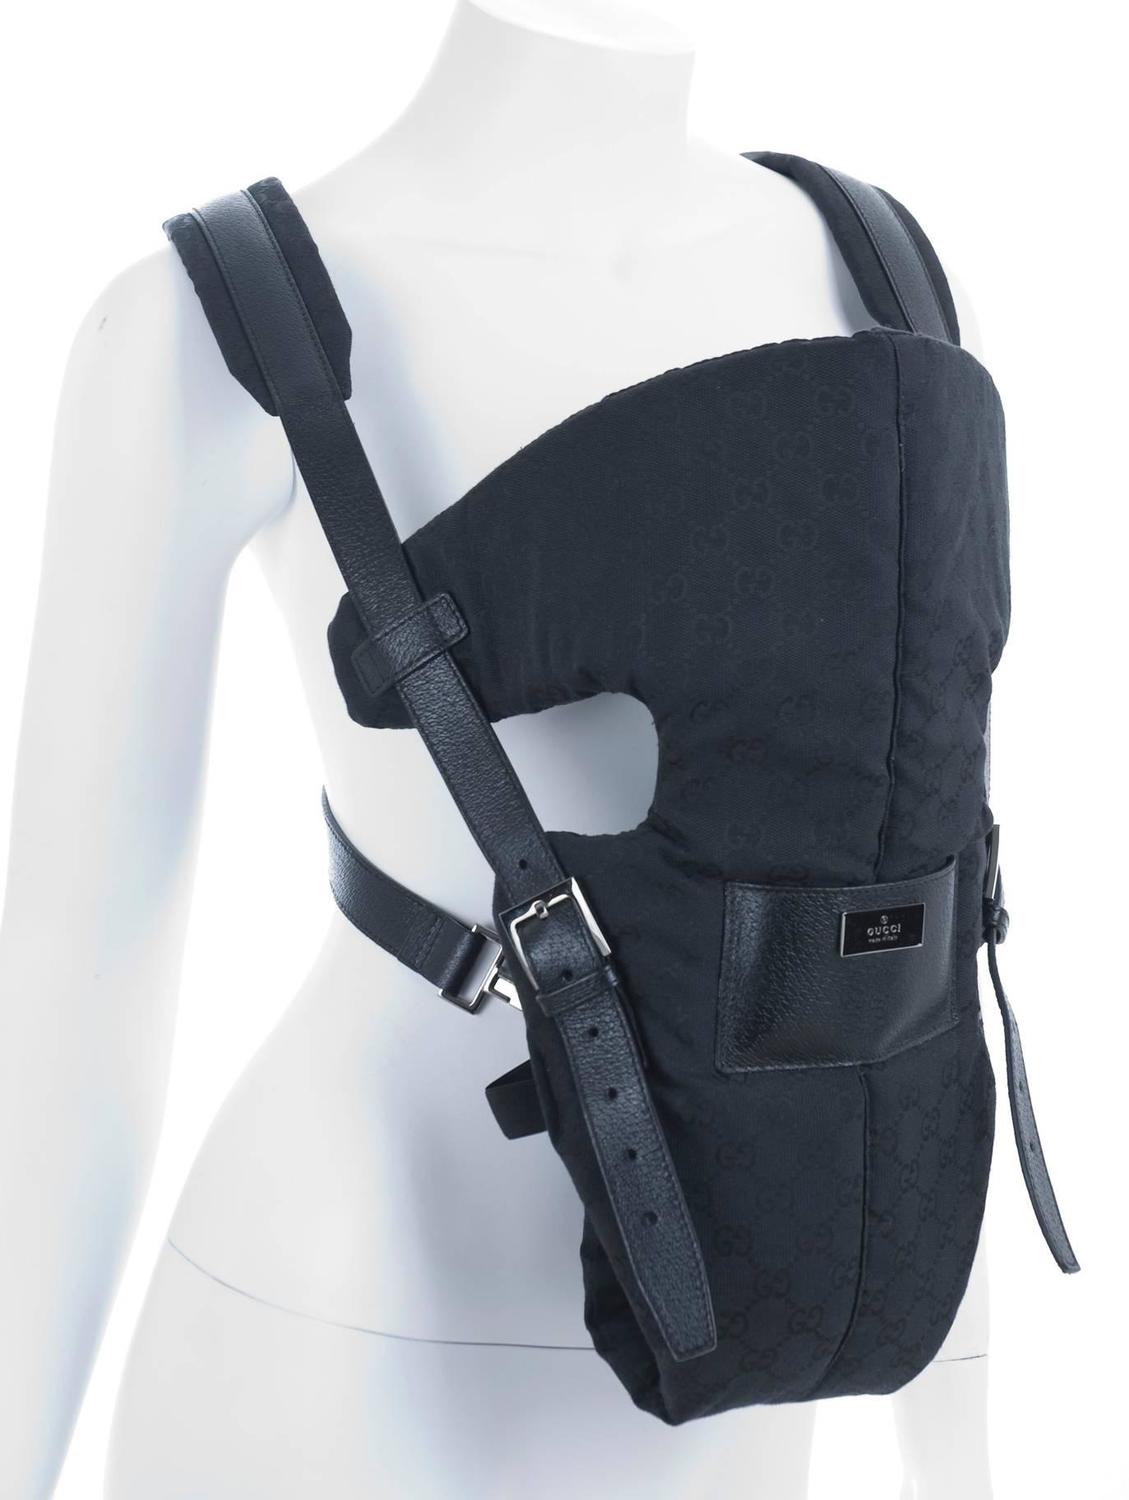 The Gucci Baby Carrier For Sale at 1stDibs | gucci carrier, baby carrier  gucci, gucci baby carrier for sale